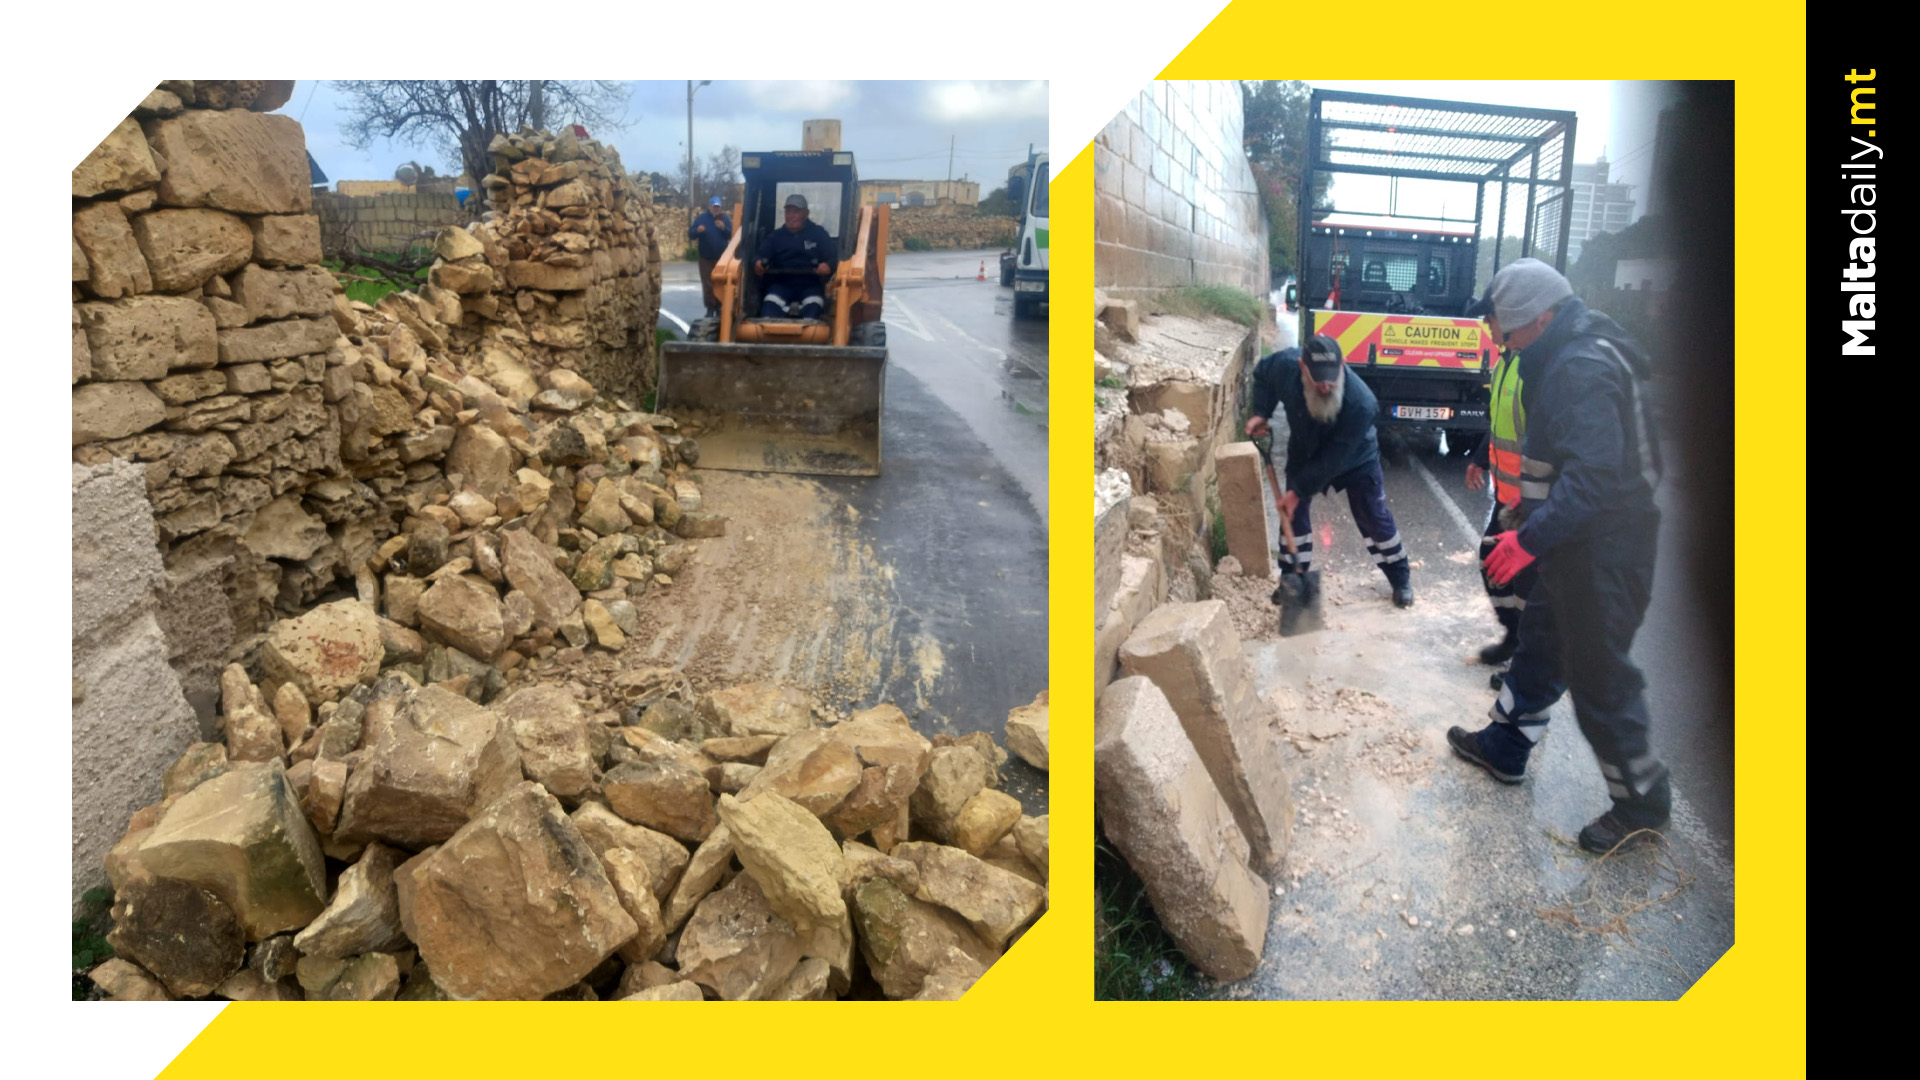 Malta' Cleansing Division begins cleaning & maintenance in the wake of Storm Helios